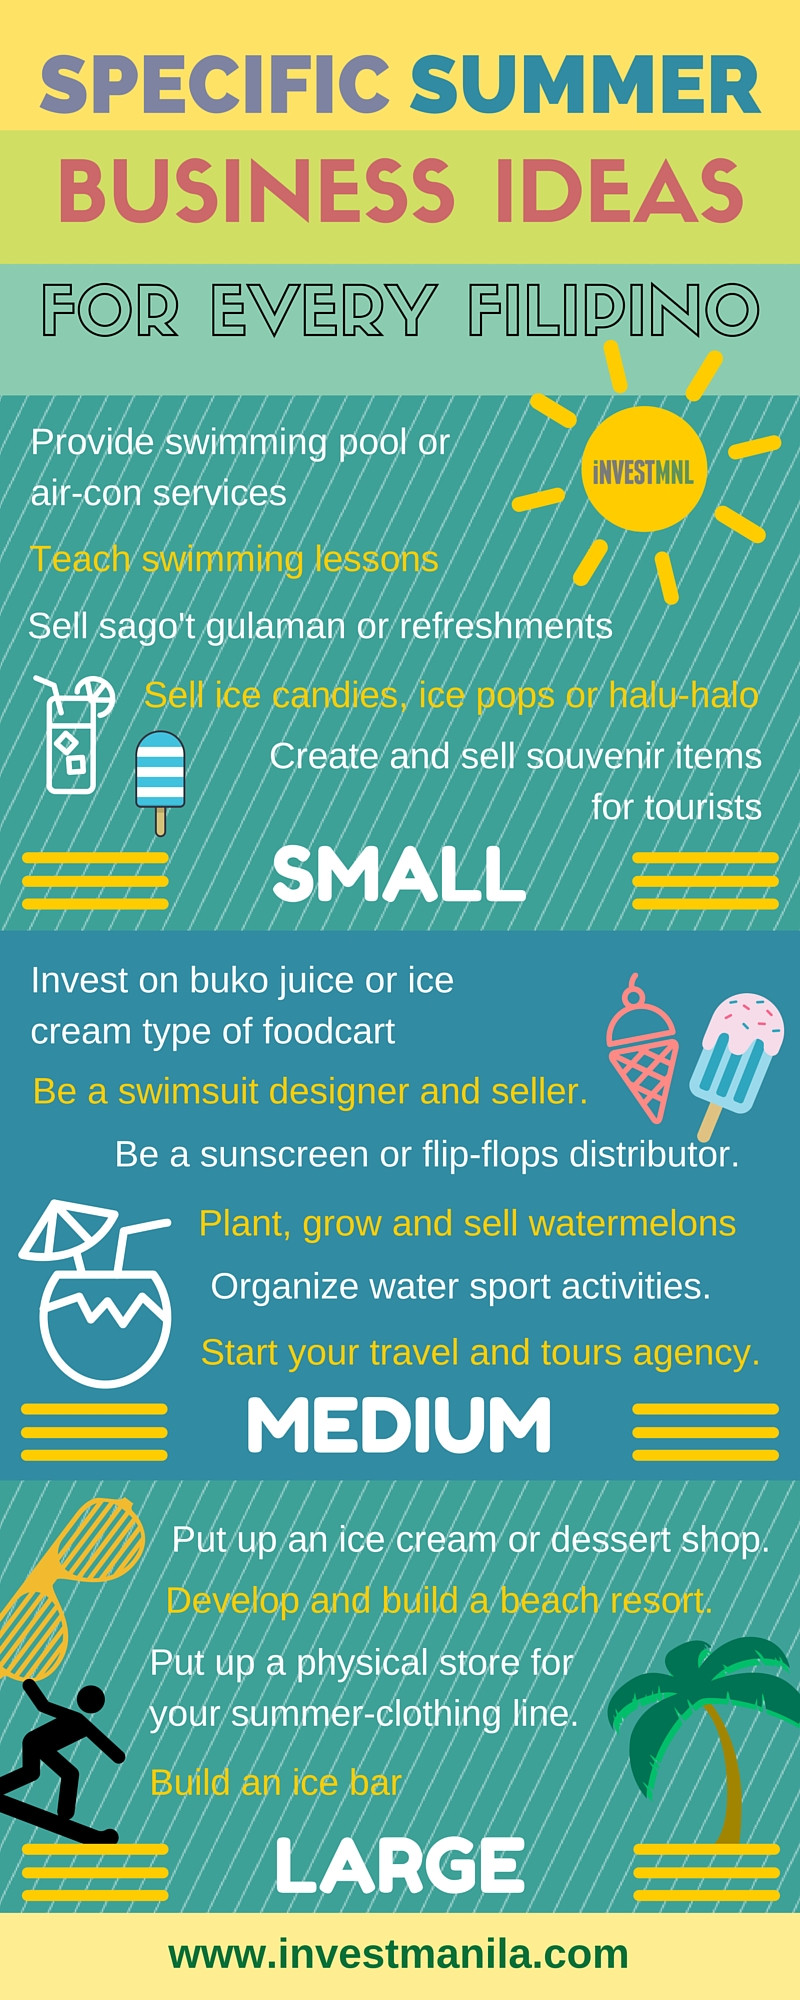 Summer Business Ideas
 15 Specific Summer Business Ideas for Every Filipino